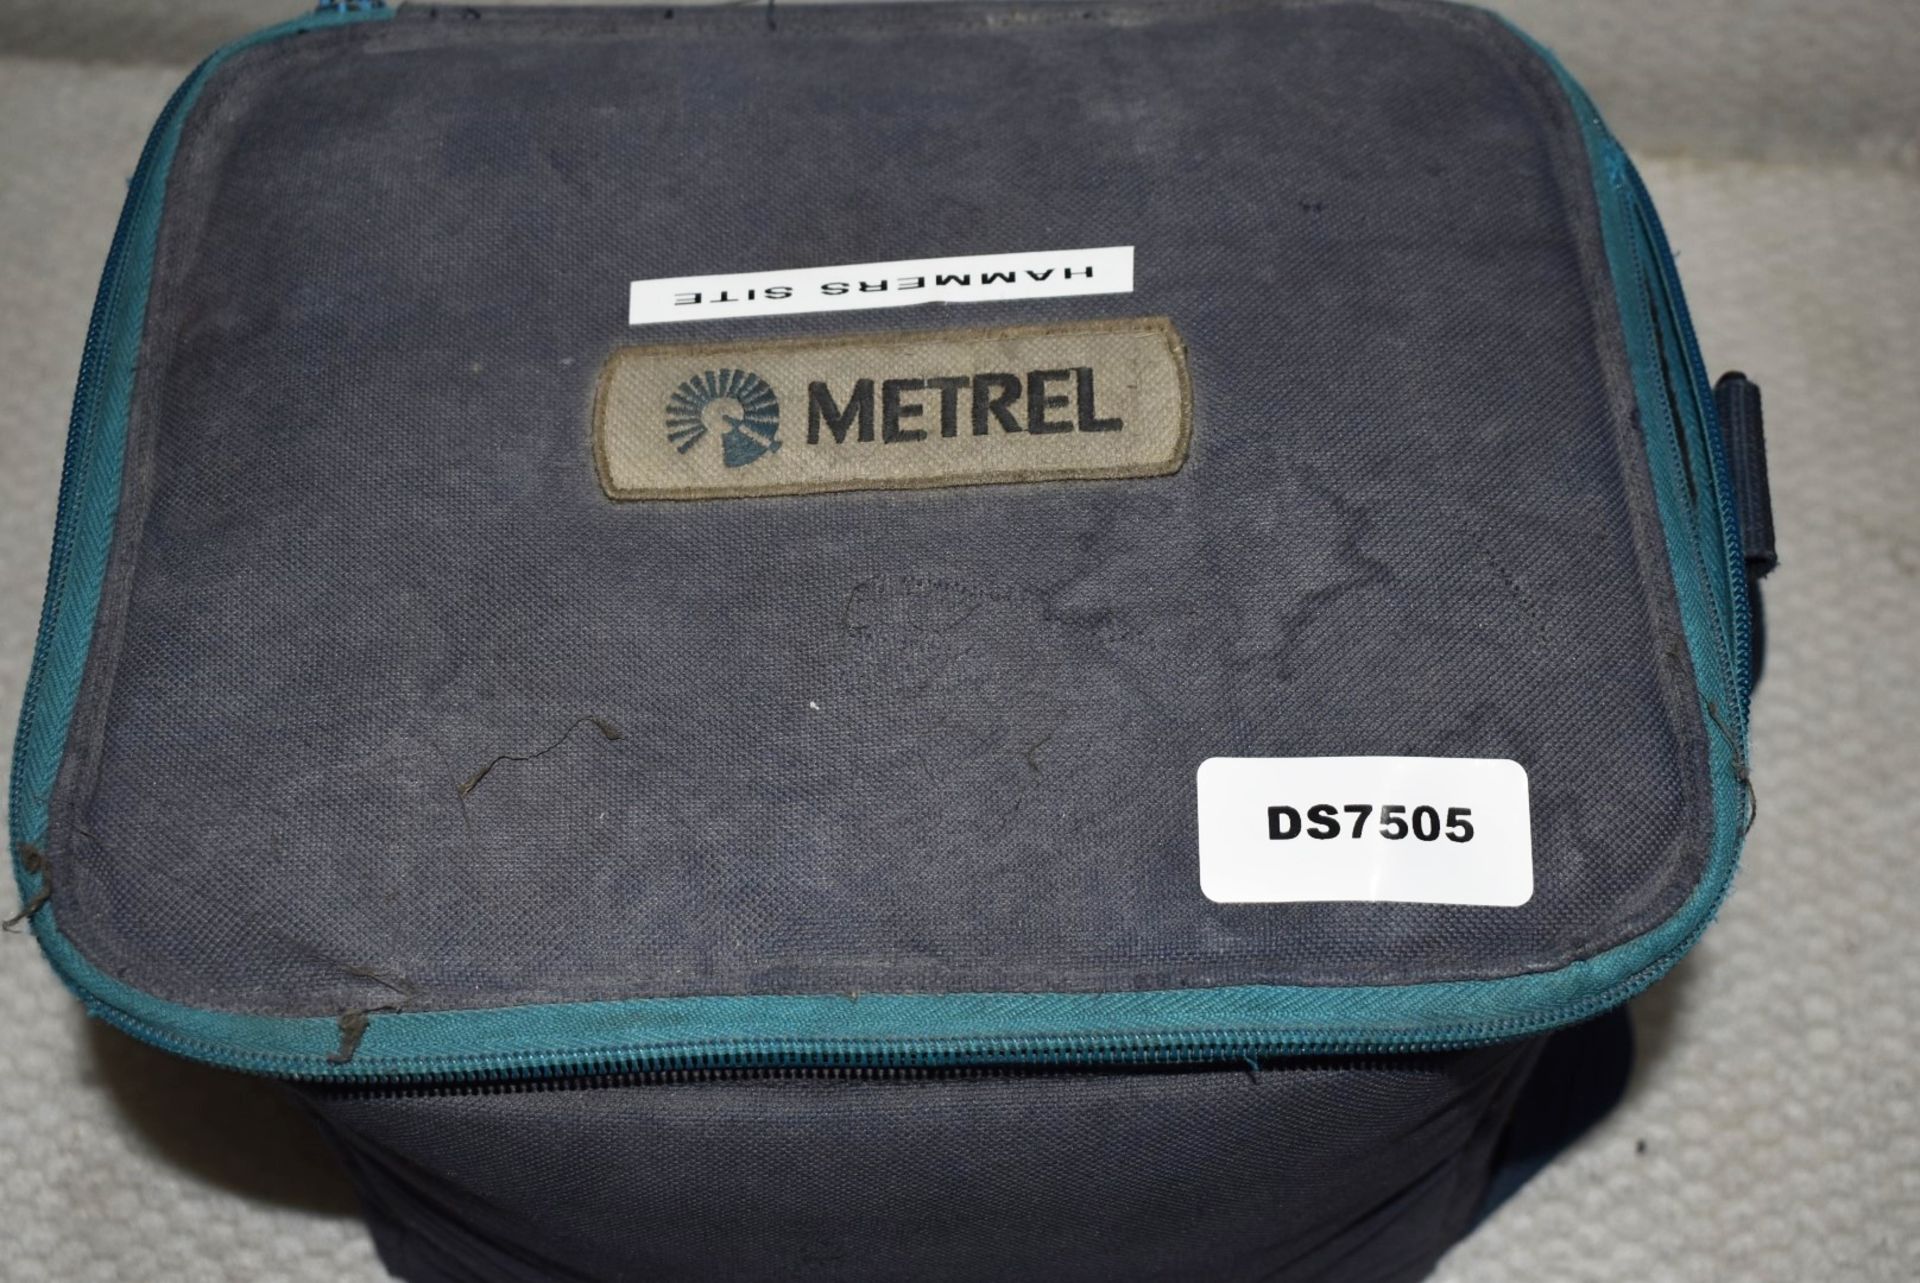 1 x METREL Easitest Multifunctional Portable Electrical Tester With Carry Case - Ref: DS7505 ALT - - Image 4 of 8